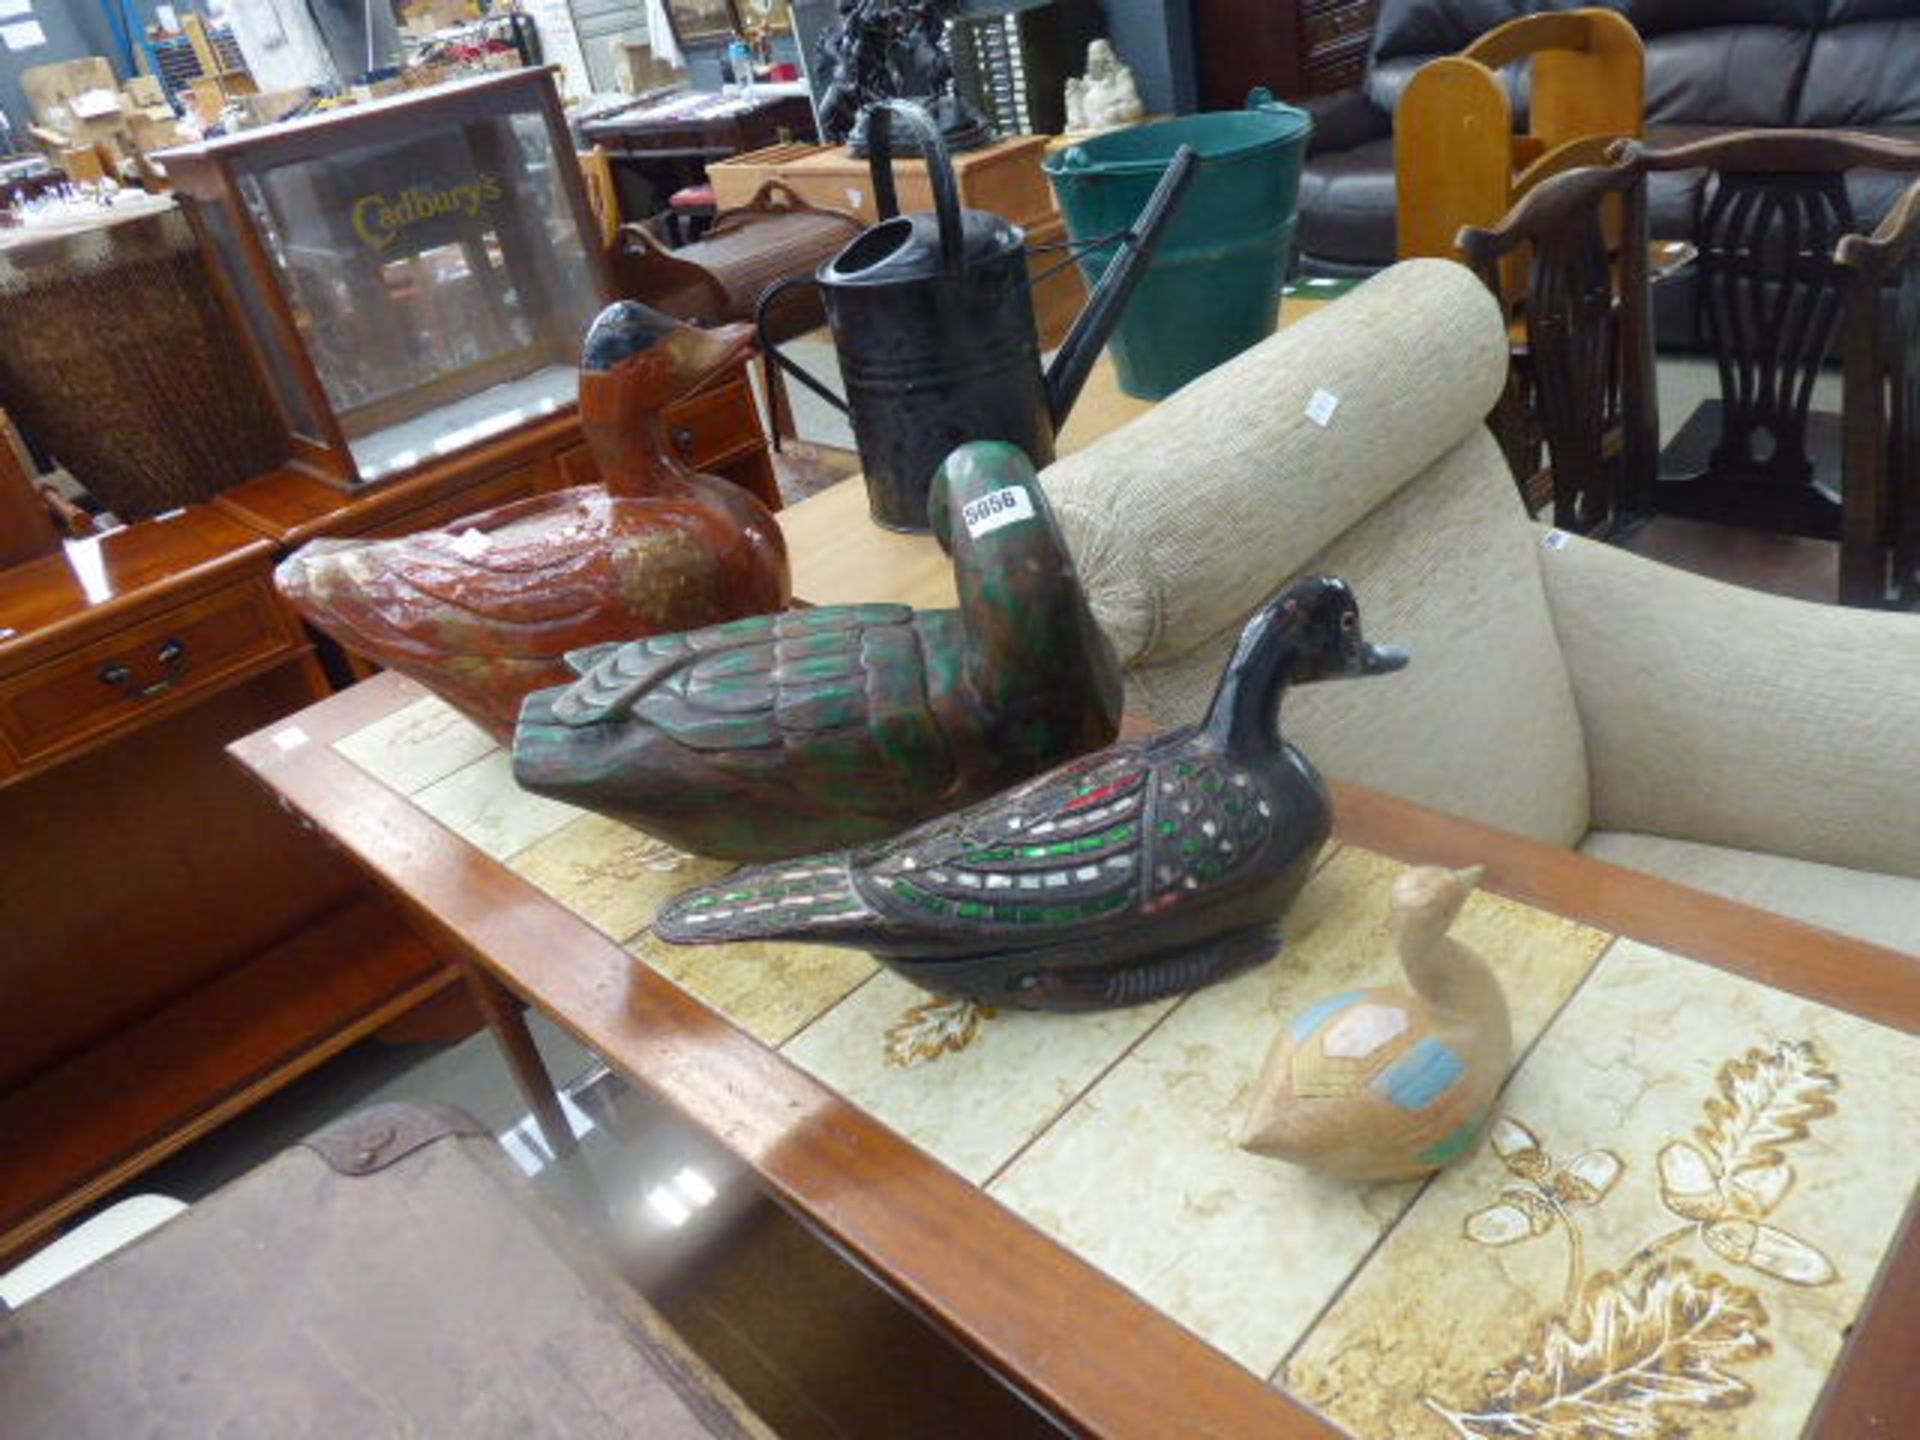 Four painted wooden ducks